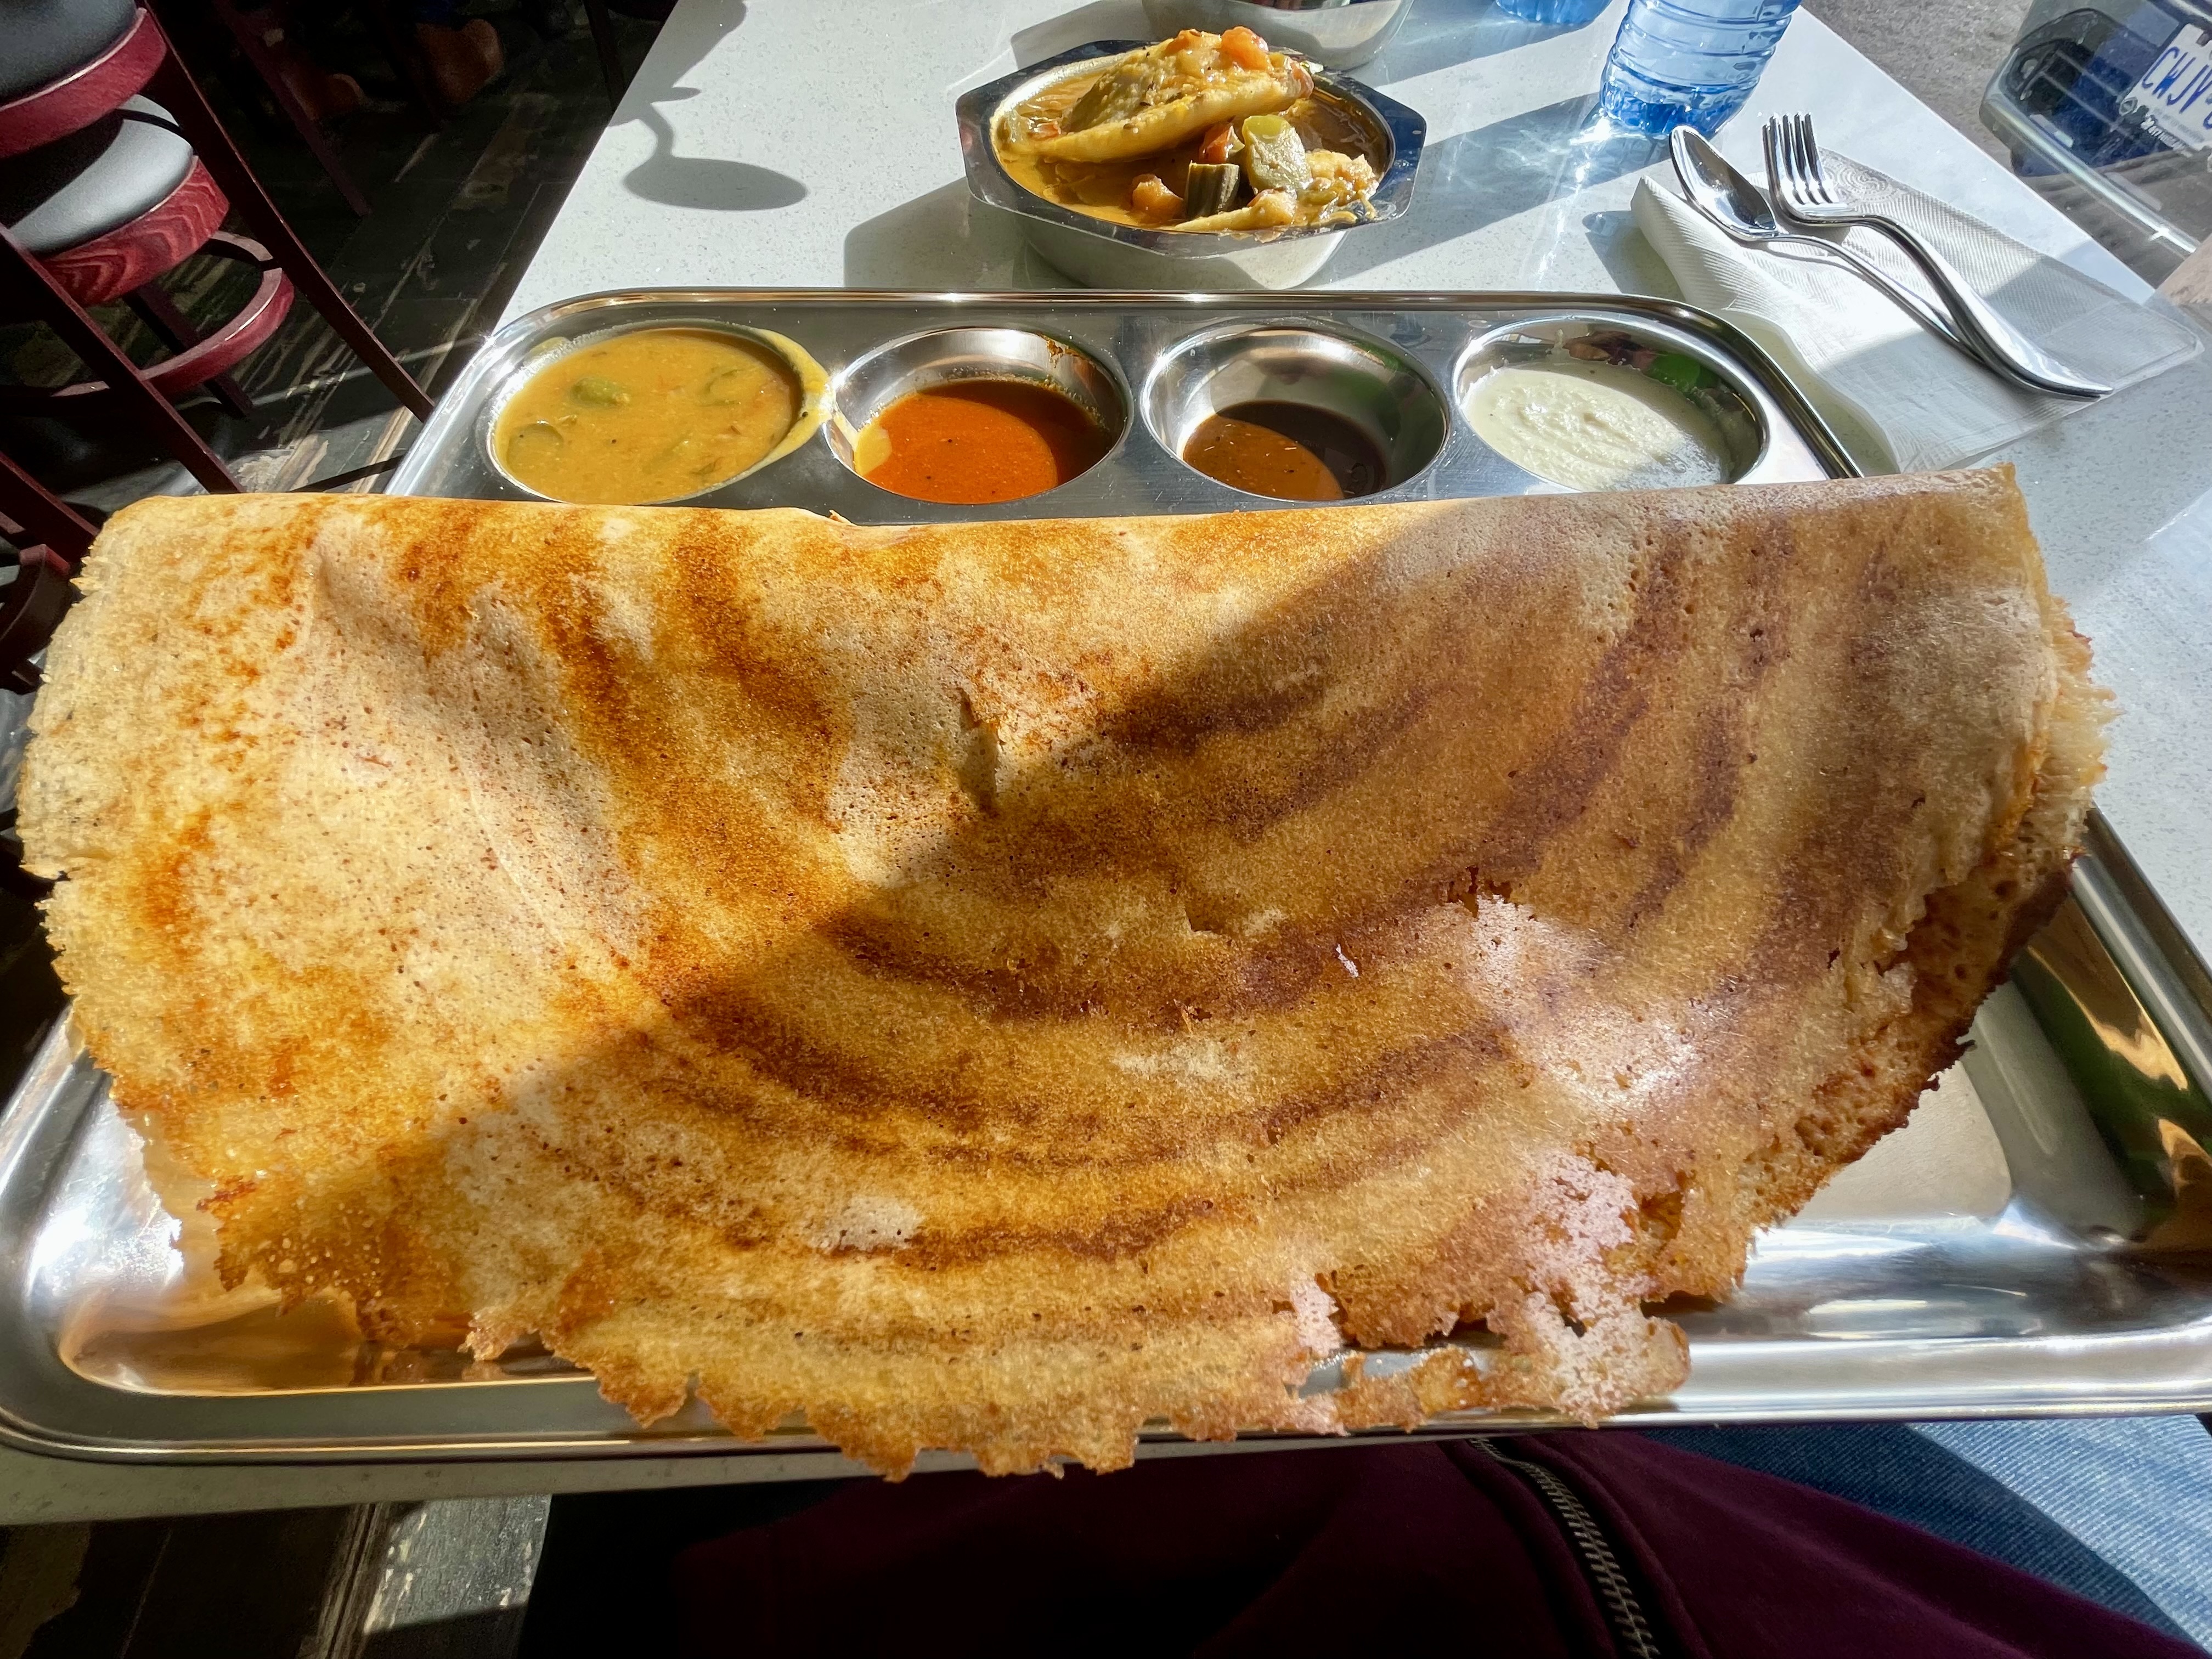 Dosa is made by soaking rice and lentils overnight in water and then grinding it into a batter, which is fermented overnight and then pan-roasted until crispy and served with potato curry, chutneys or sambar